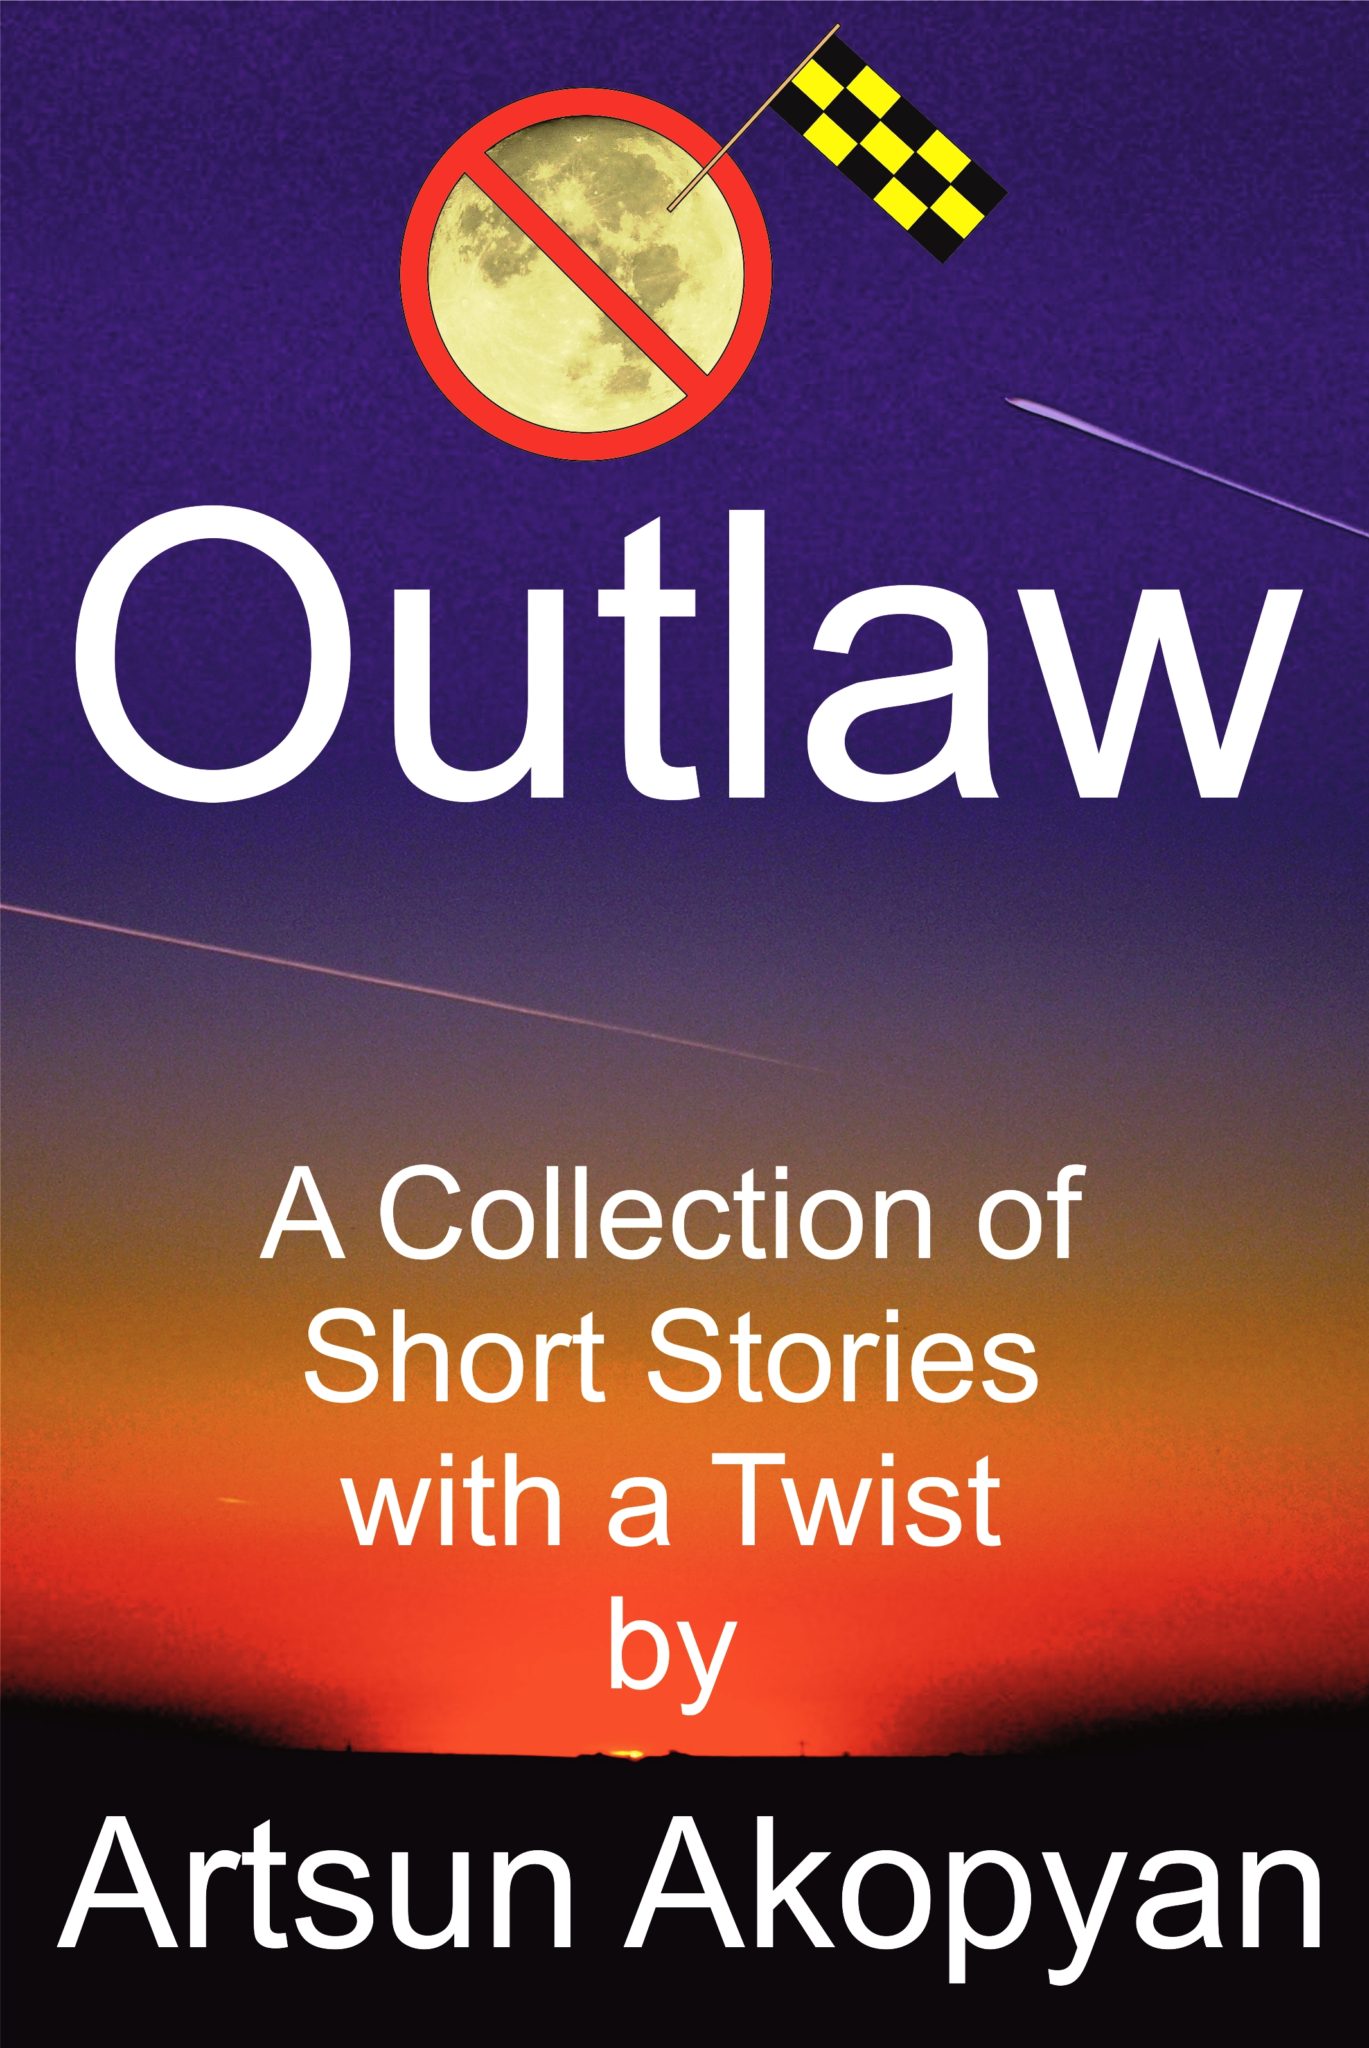 FREE: Outlaw: A Collection of Short Stories with a Twist by Artsun Akopyan